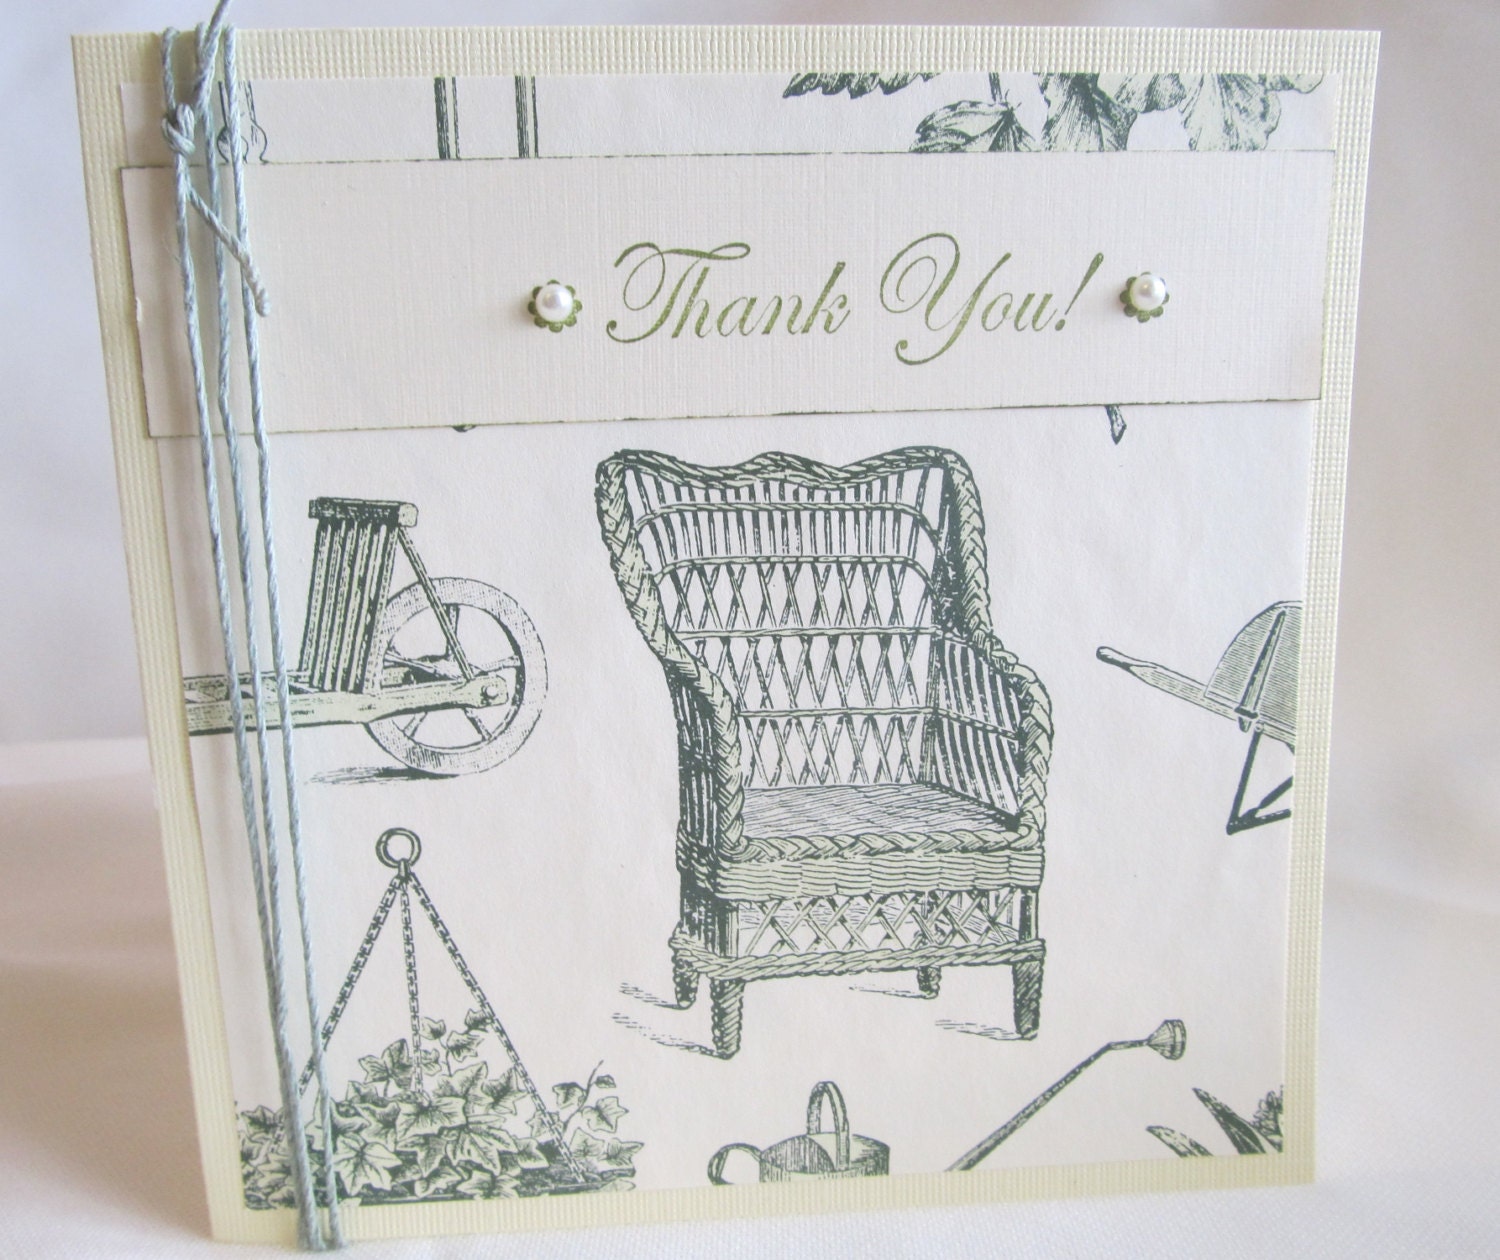 Thank You Card - Handmade Thank You Card - Hand Stamped Card - Cottage Chic Style Card - Pale Yellow Card - Garden Theme Card - Rustic Chic - PrettyByrdDesigns